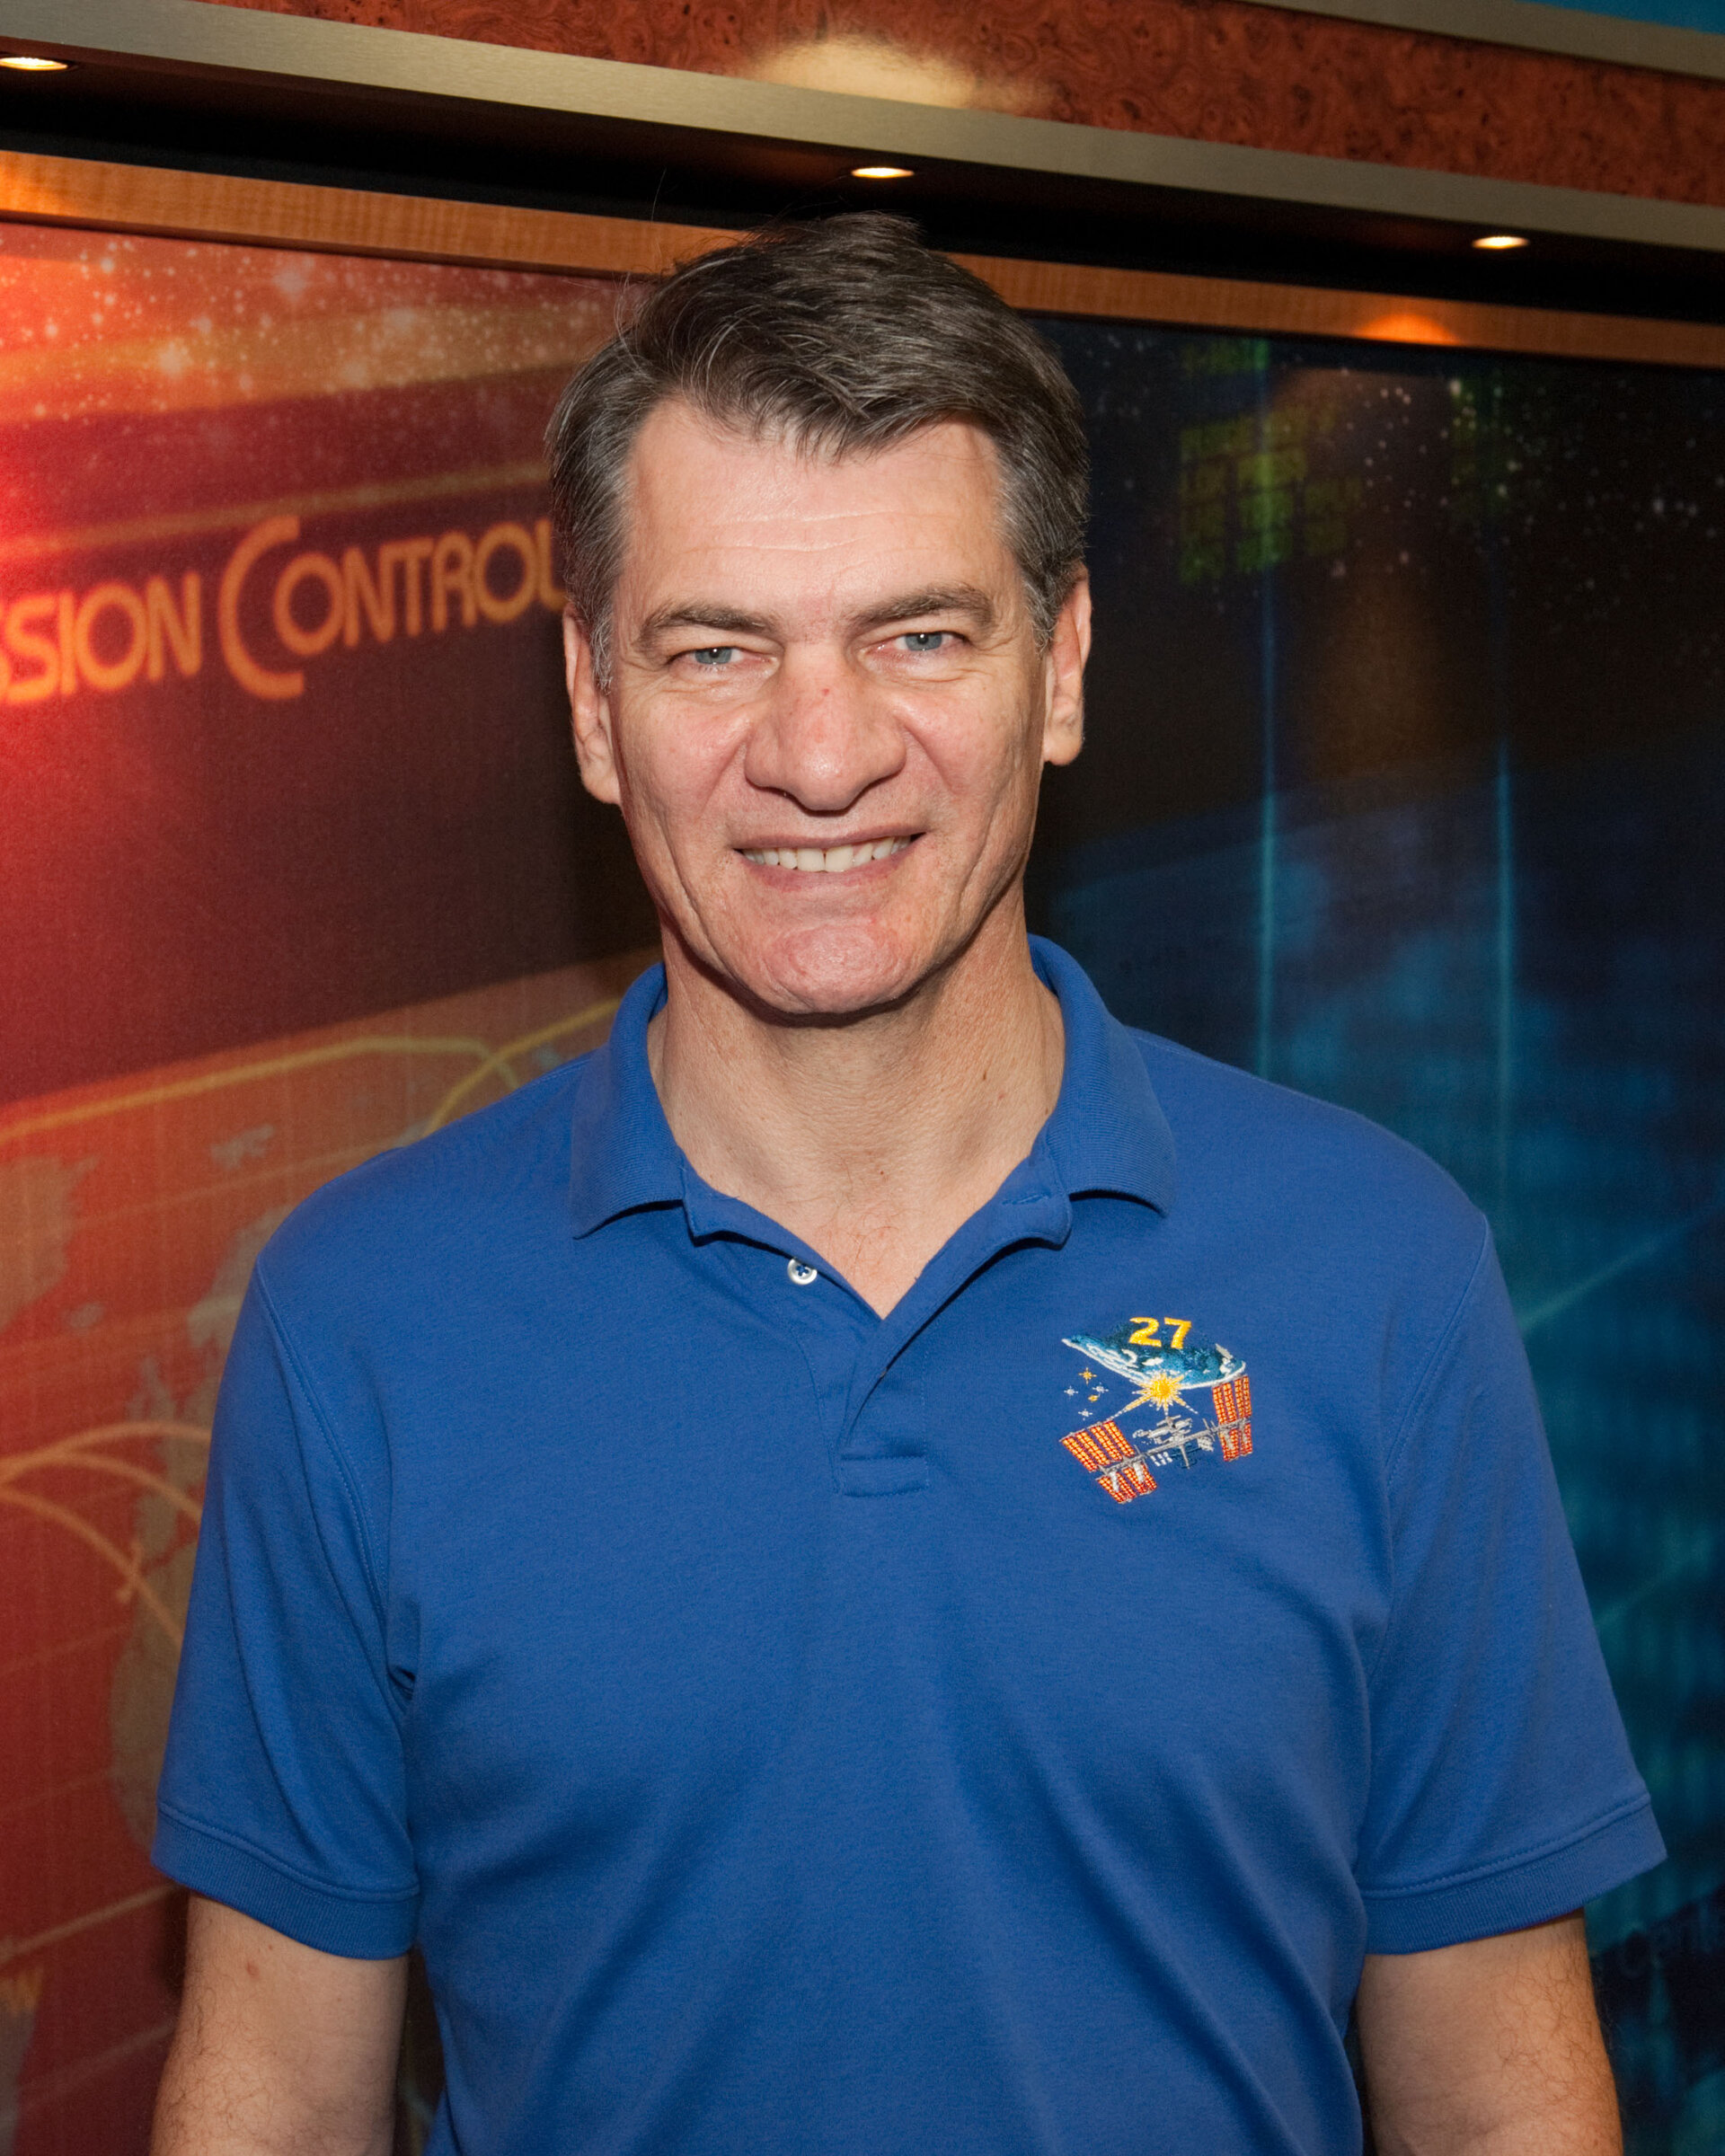 Paolo Nespoli poses for a portrait